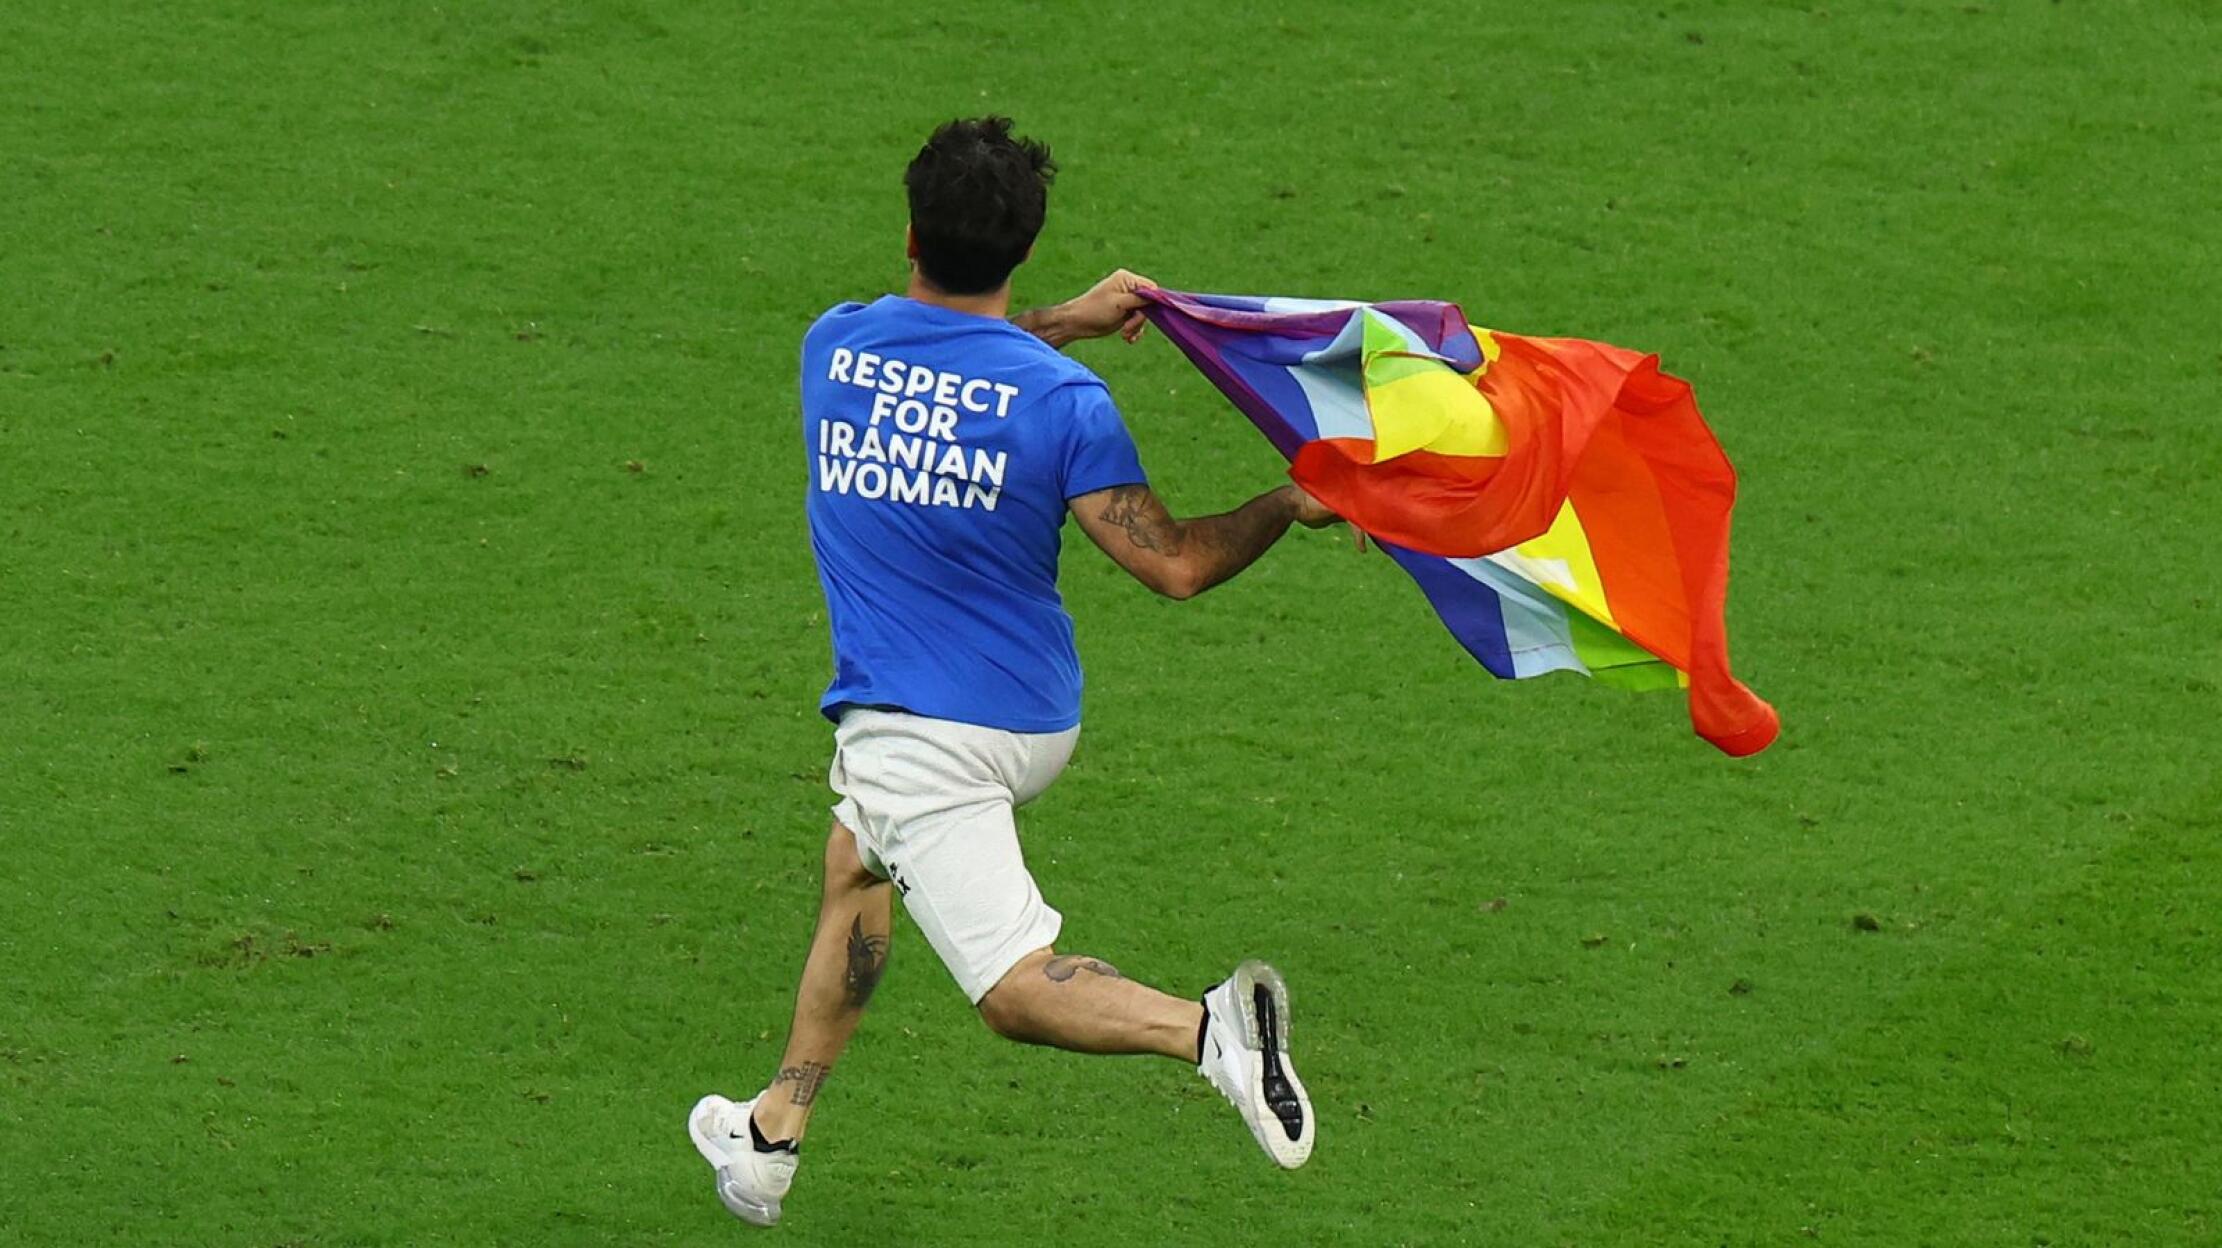 A pitch invader runs onto the pitch wearing a t-shirt with a message saying 'Respect for Iranian Women' and holding a rainbow flag during the match between Portugal and Uruguay on Monday